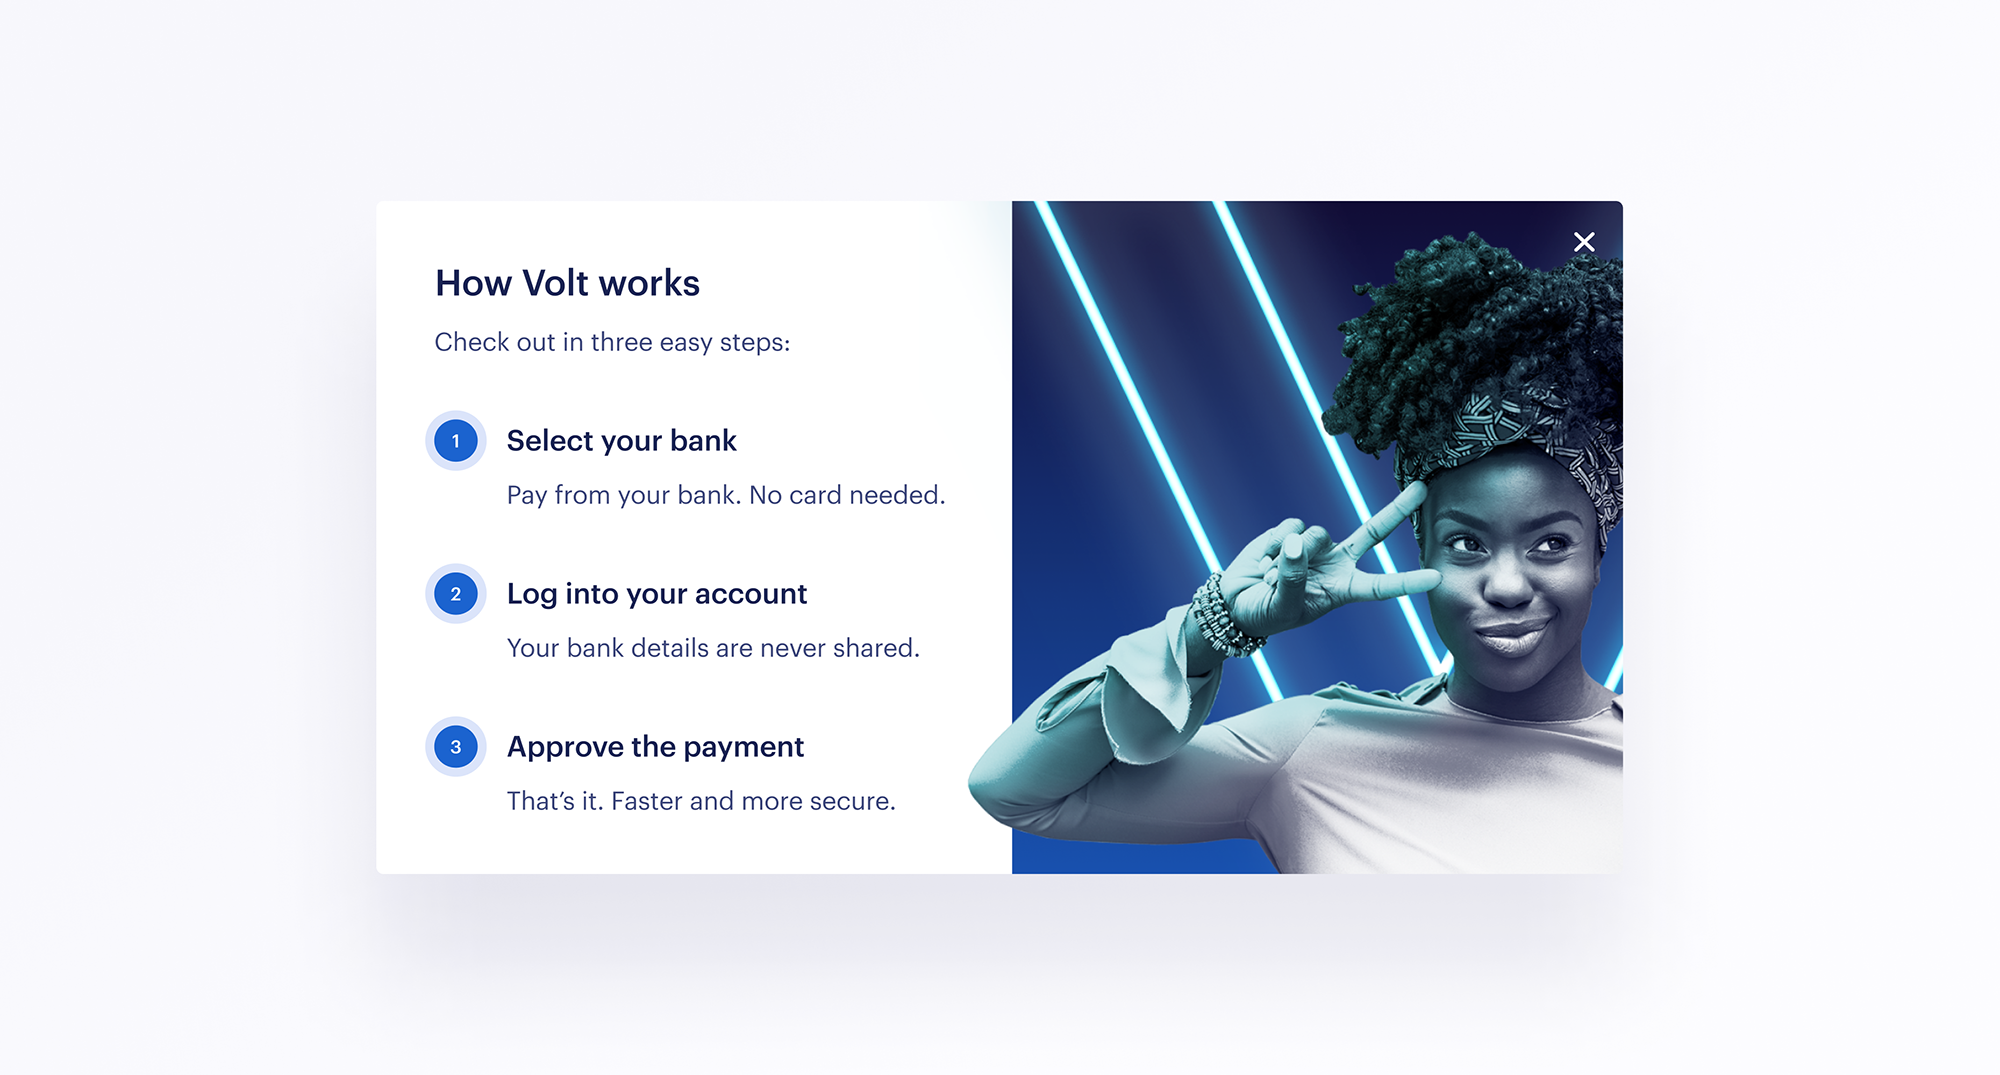 How Volt works: check out in three easy steps